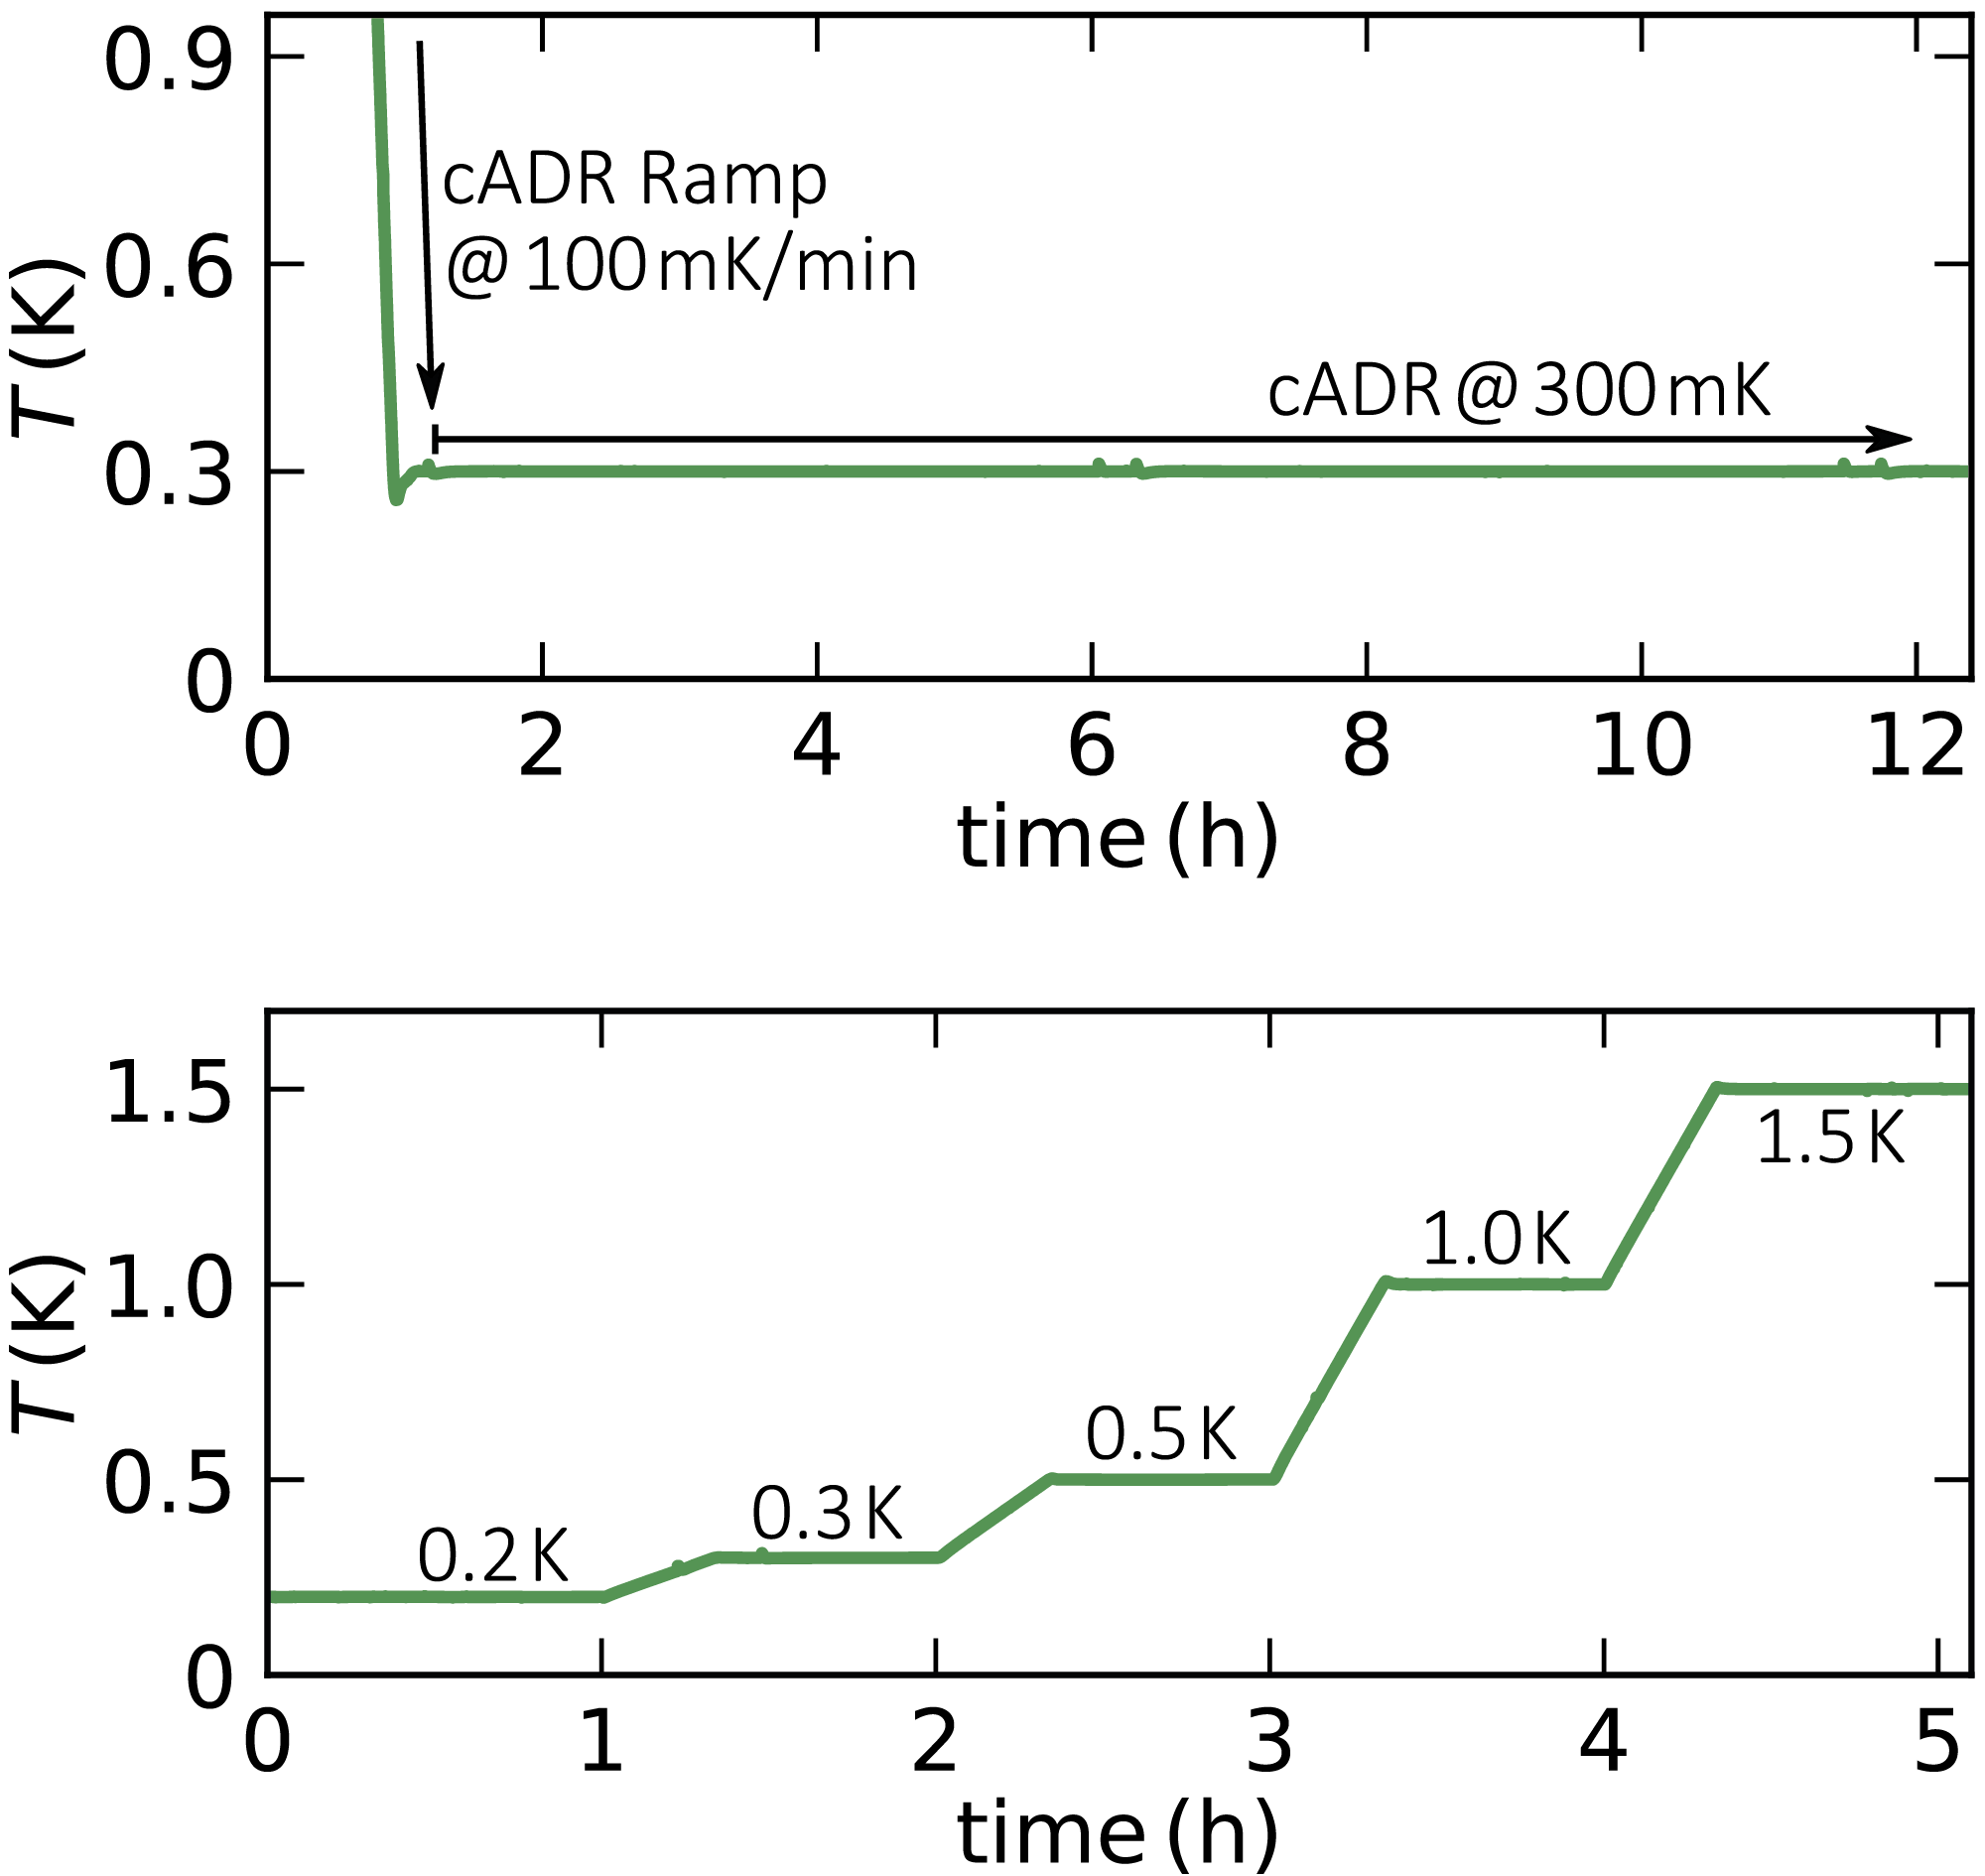 The top figure shows the temperature of the ADR units running in continuous mode at 300 mK. The bottom figure shows the temperature control, stepping the sample stage temperature between 200 mK and 1.5 K.